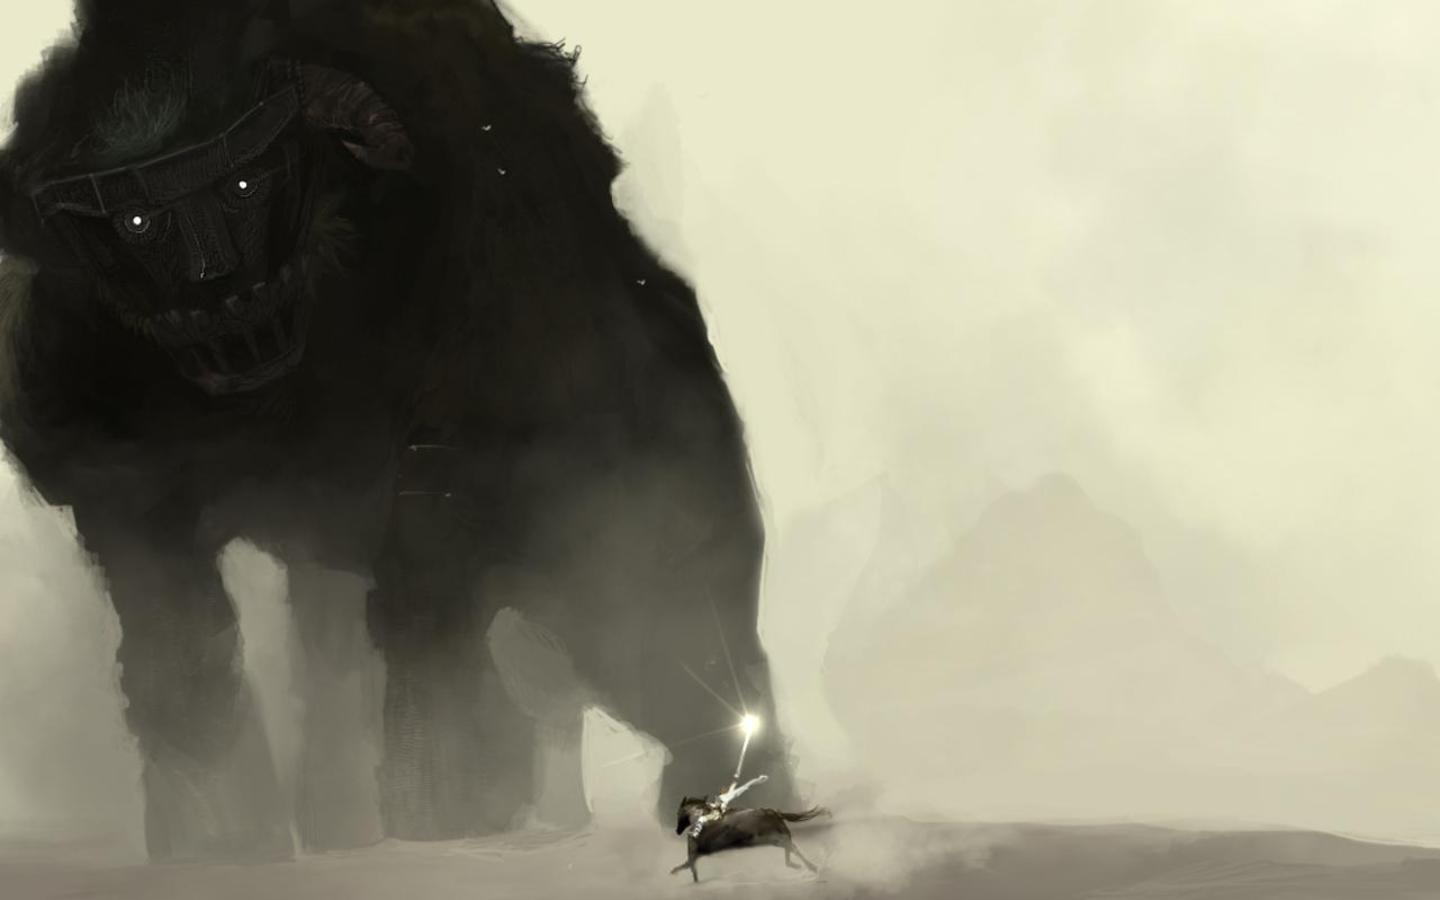 HD desktop wallpaper: Video Game, Shadow Of The Colossus download